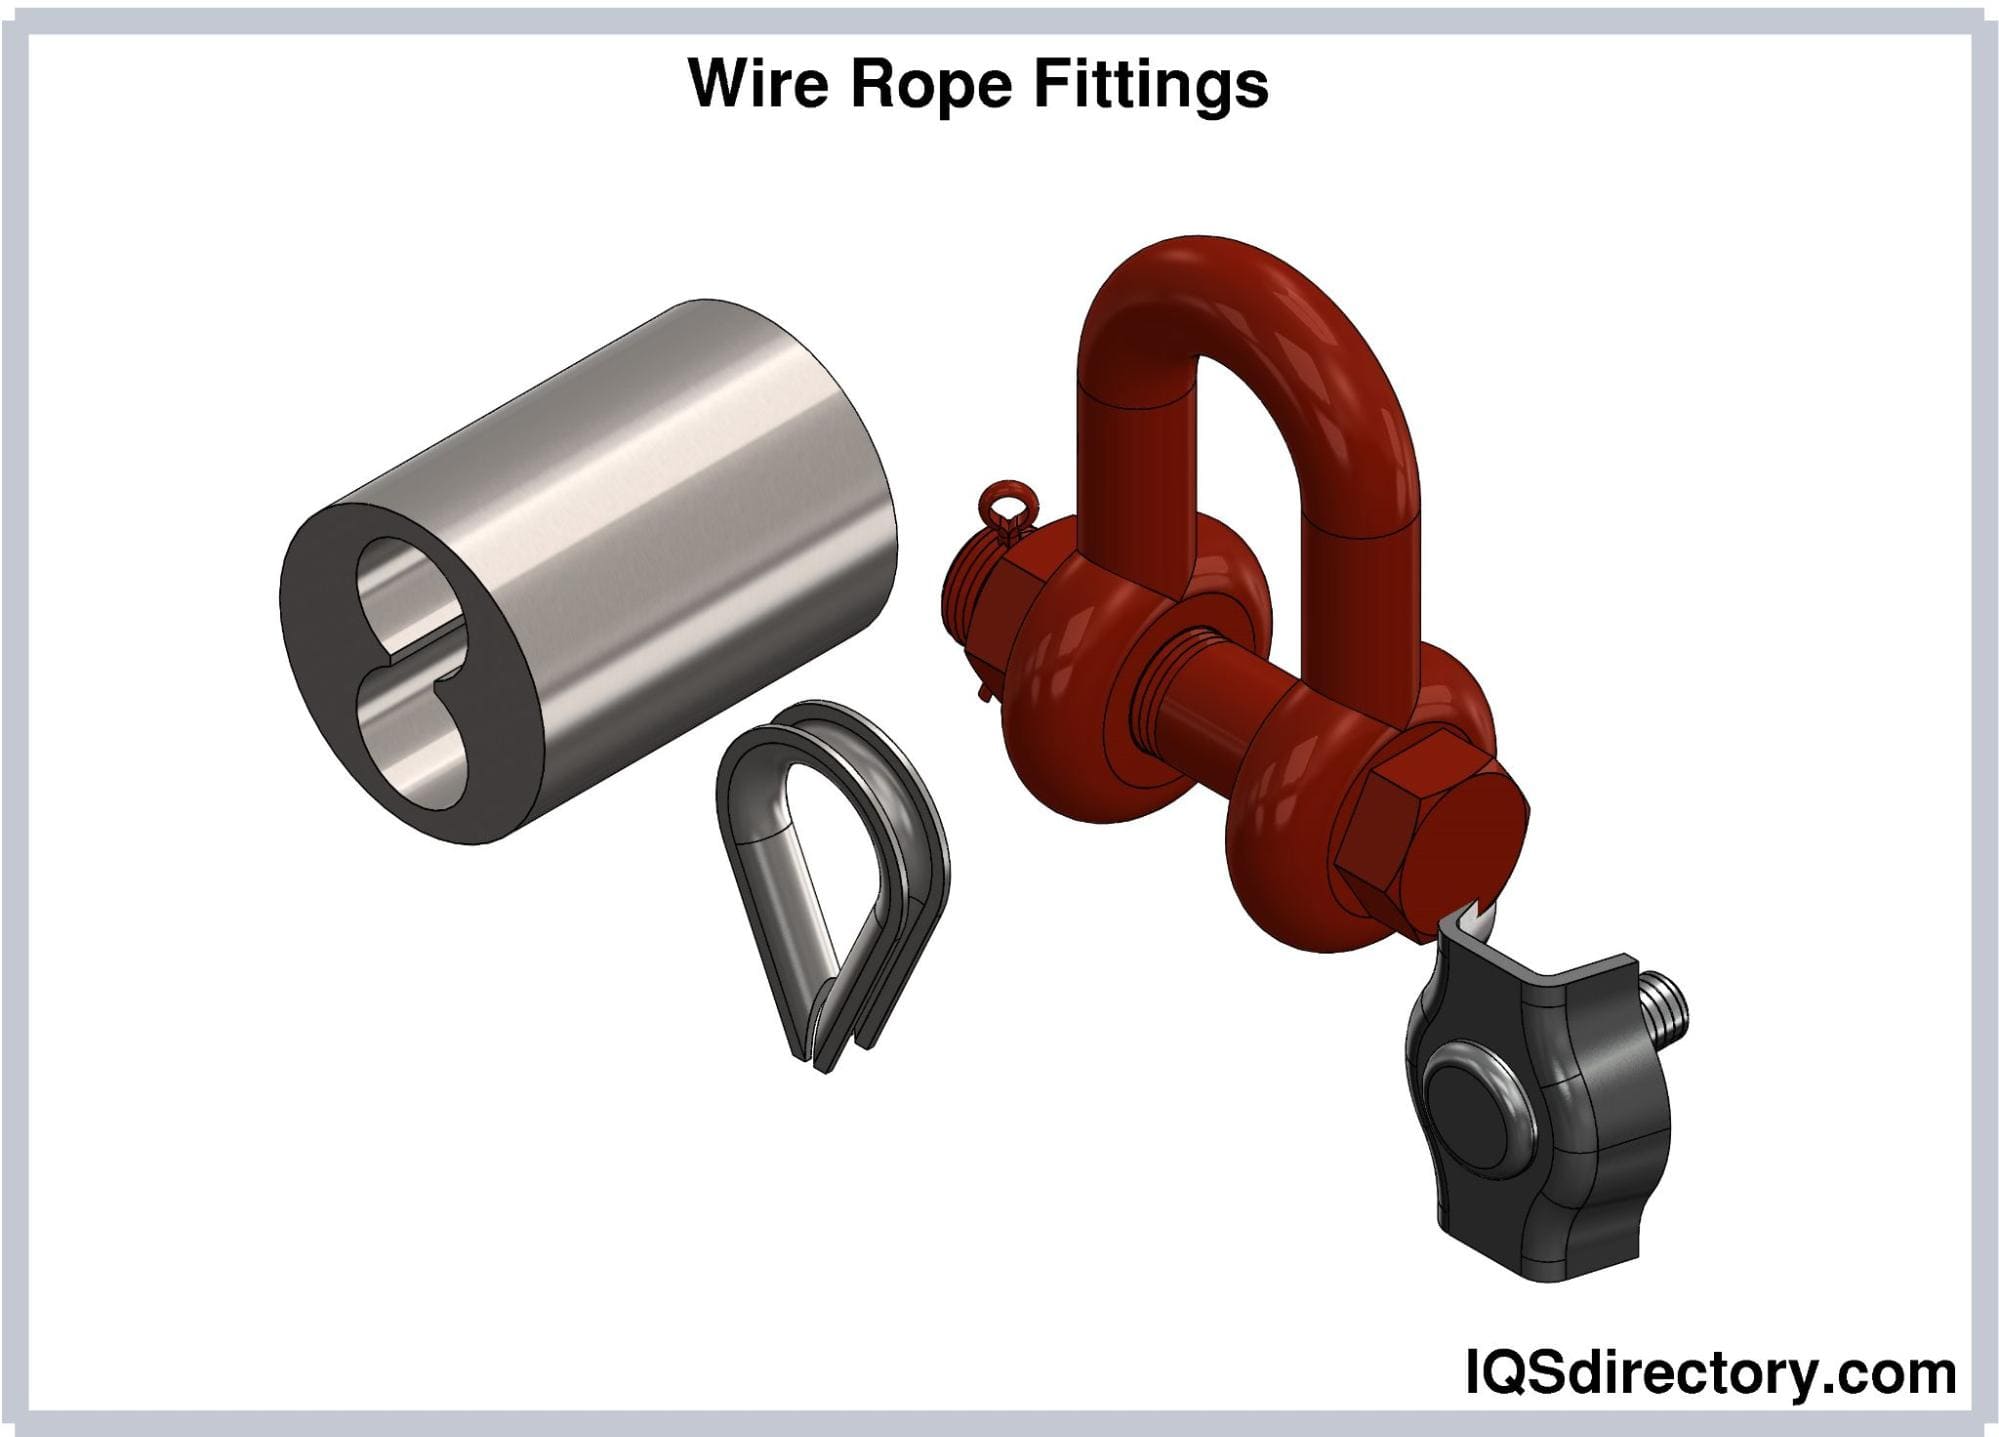 B/A Products Co. Heavy-Duty Industrial Wire Rope Assemblies